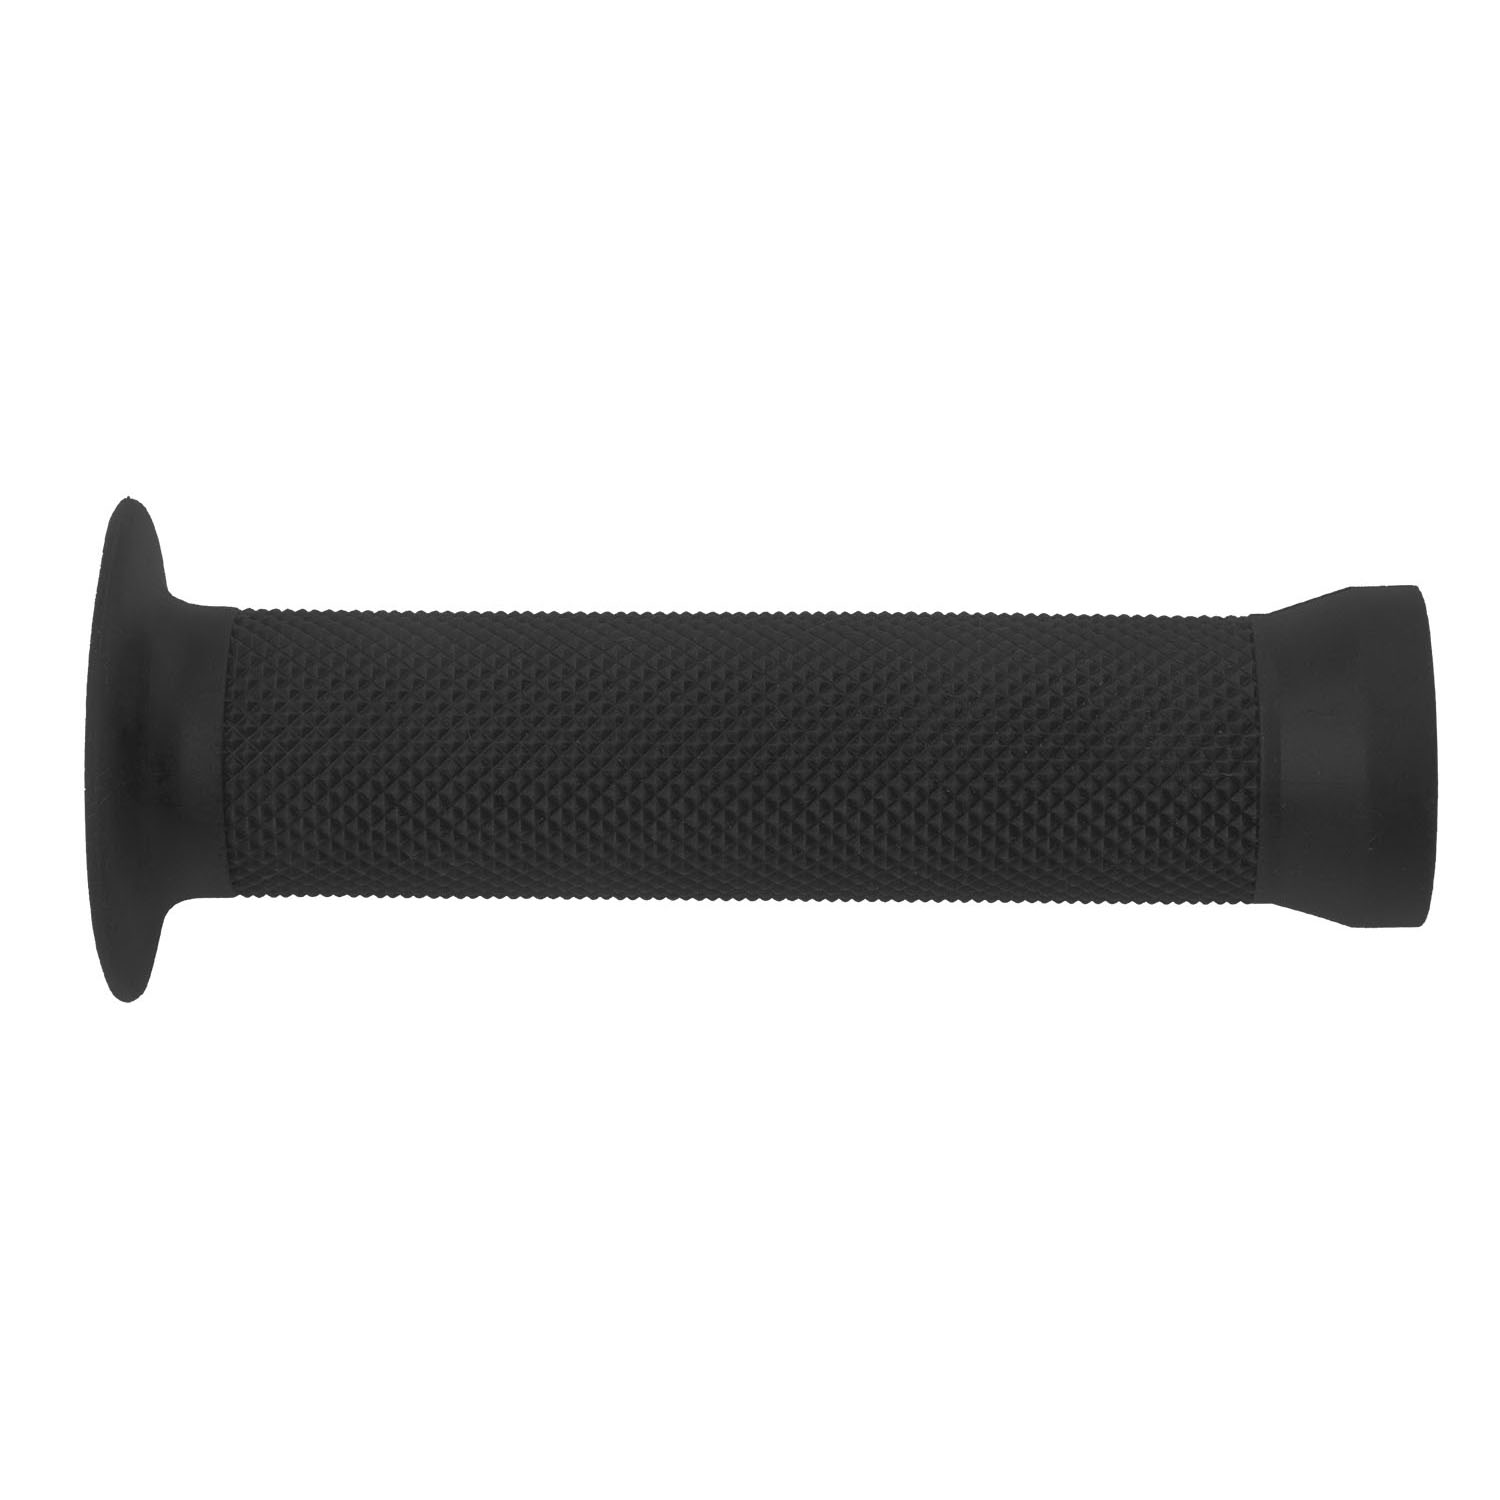 BMX 130 bicycle grips – AVAILABLE IN SELECTED BIKE SHOPS